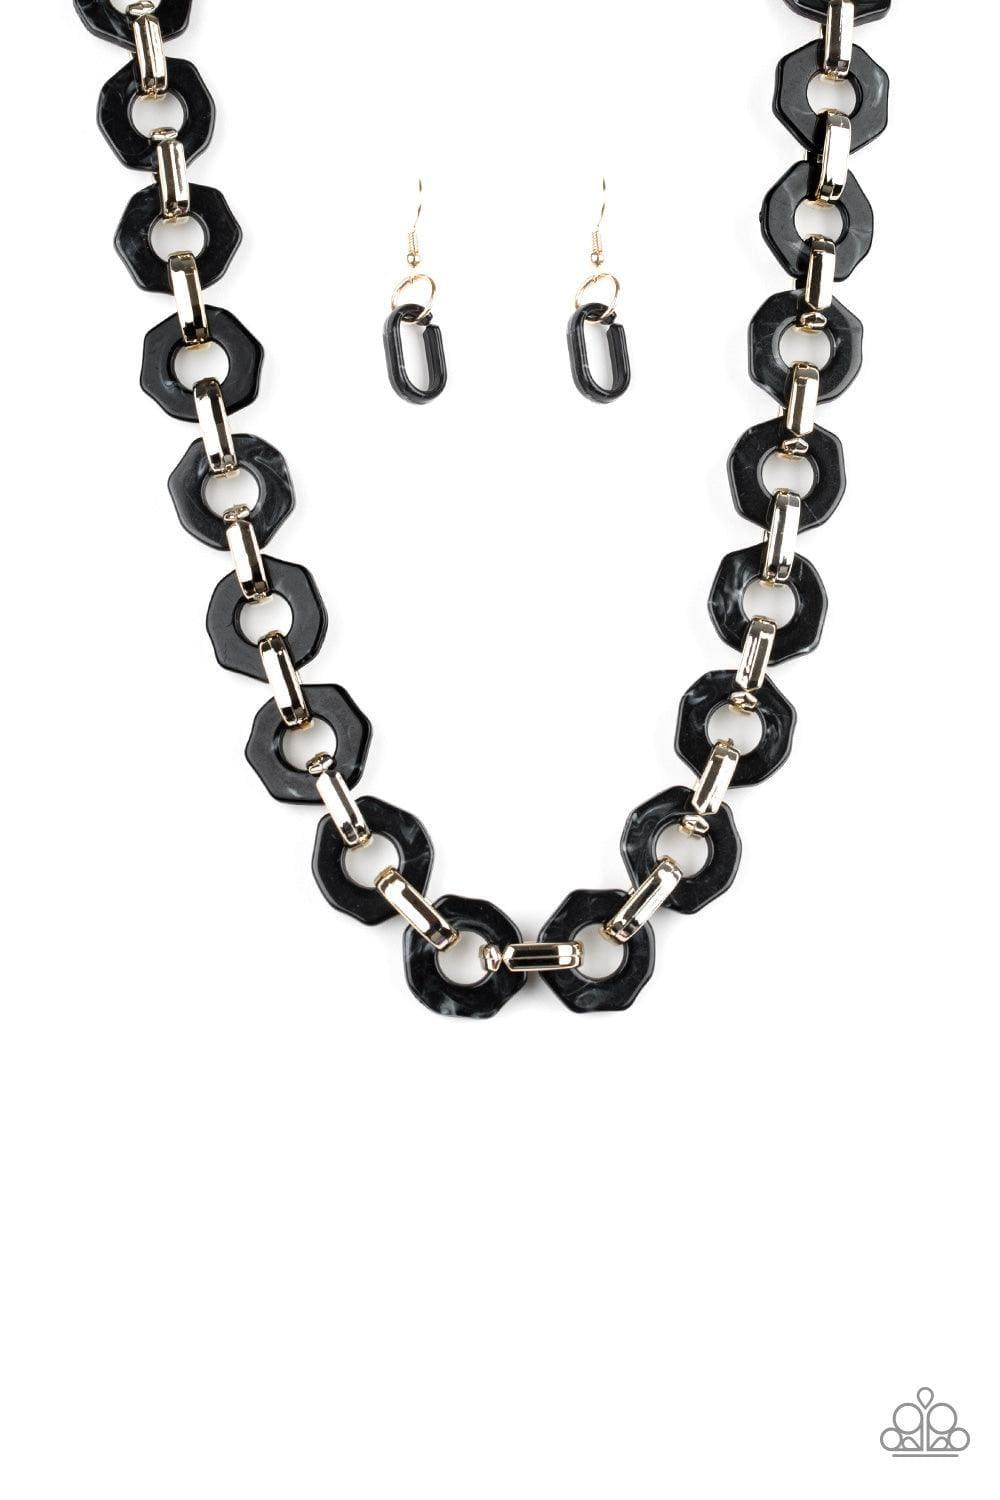 Paparazzi Accessories - Fashionista Fever - Black Necklace - Bling by JessieK